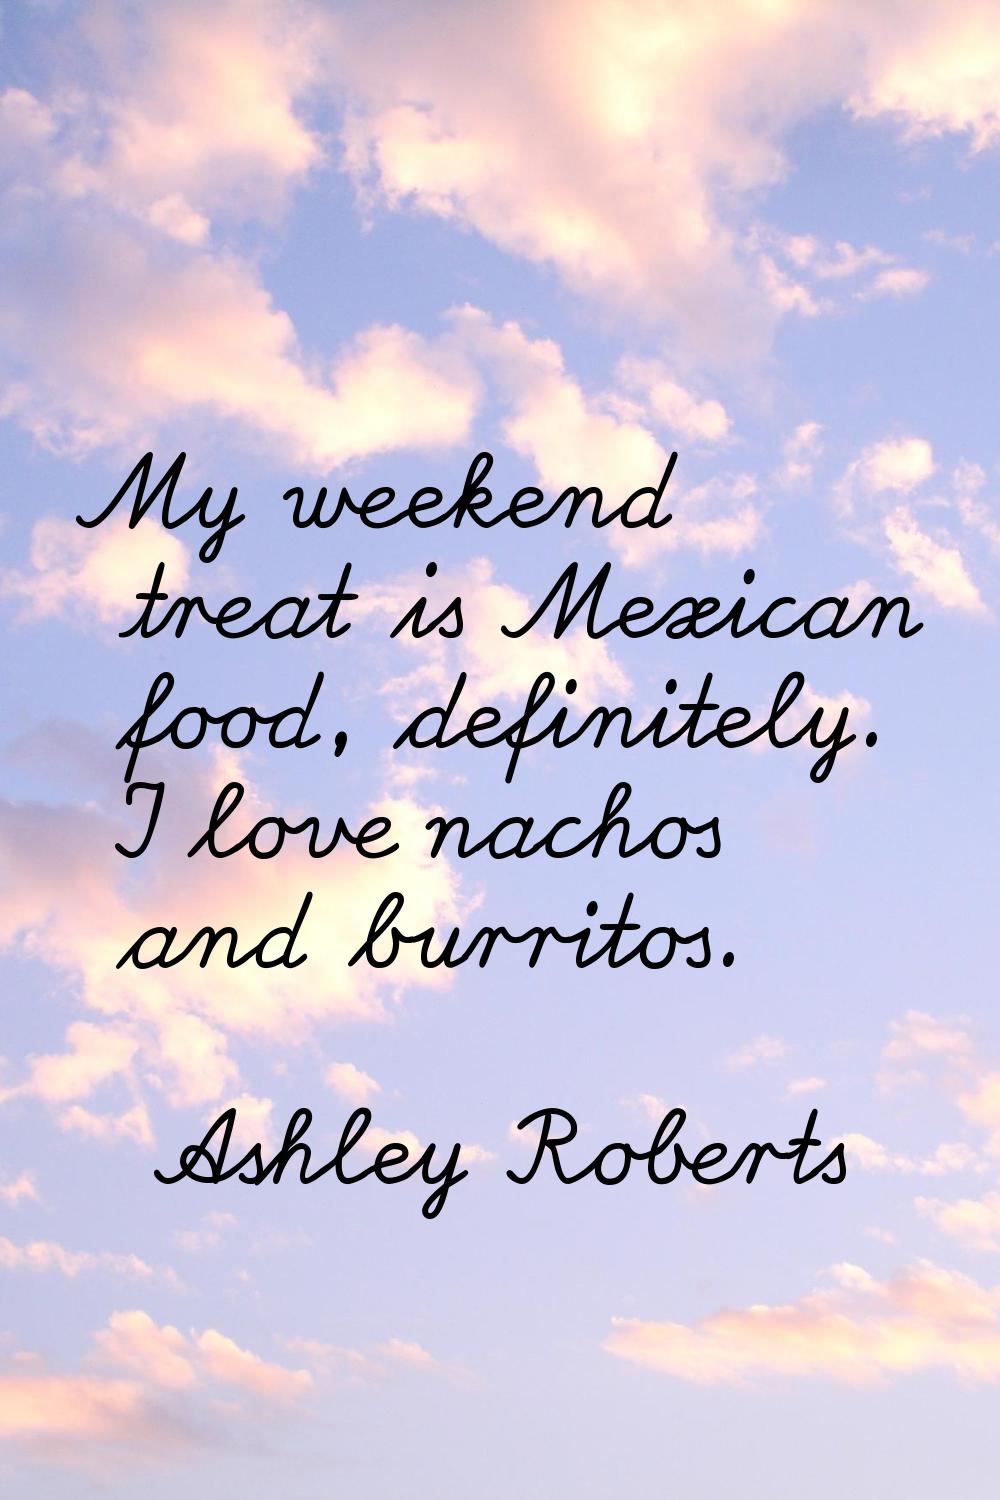 My weekend treat is Mexican food, definitely. I love nachos and burritos.